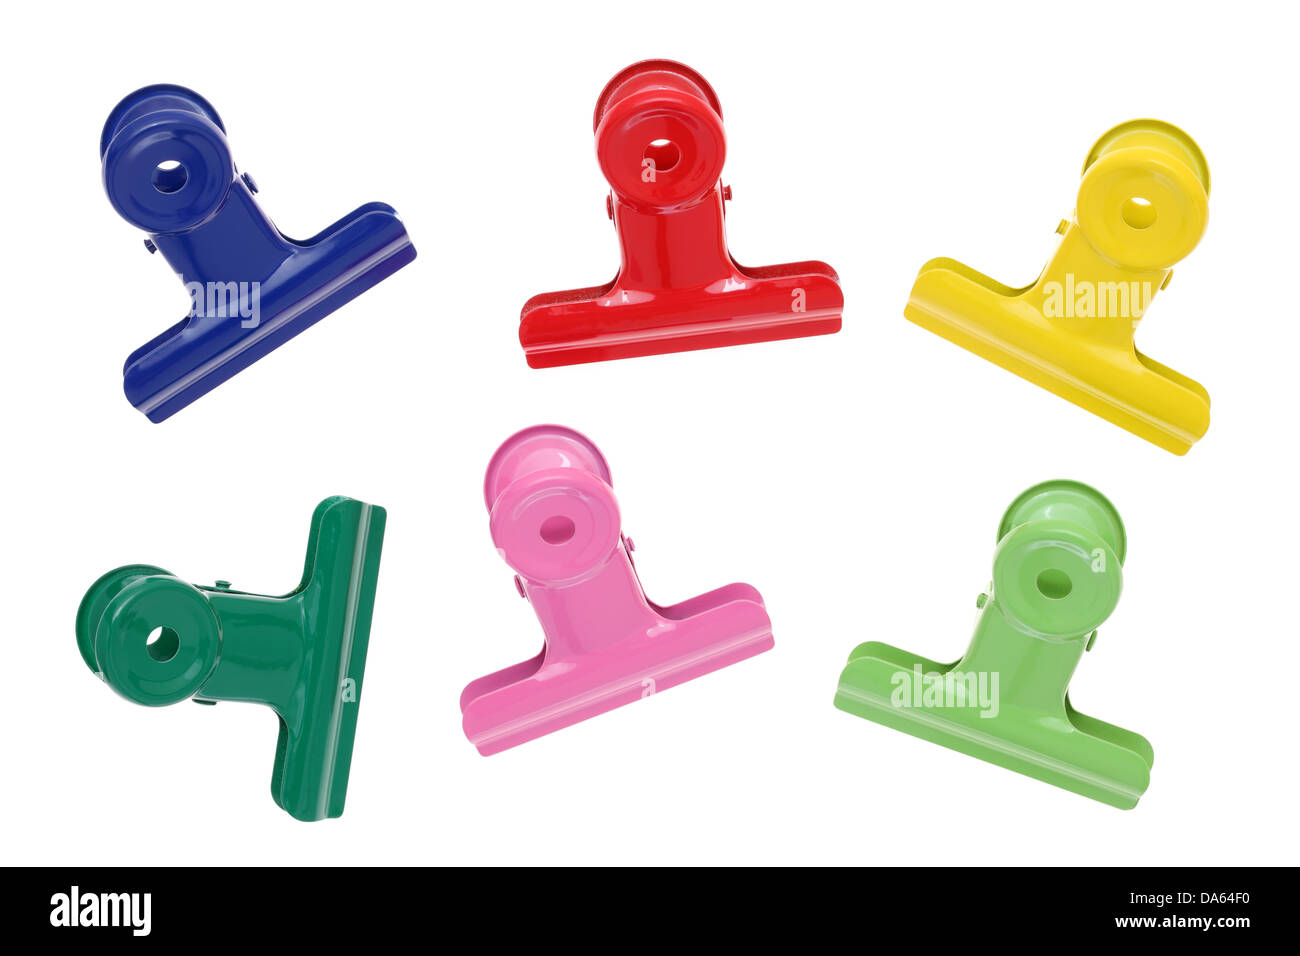 colorful binder clips Stock Photo